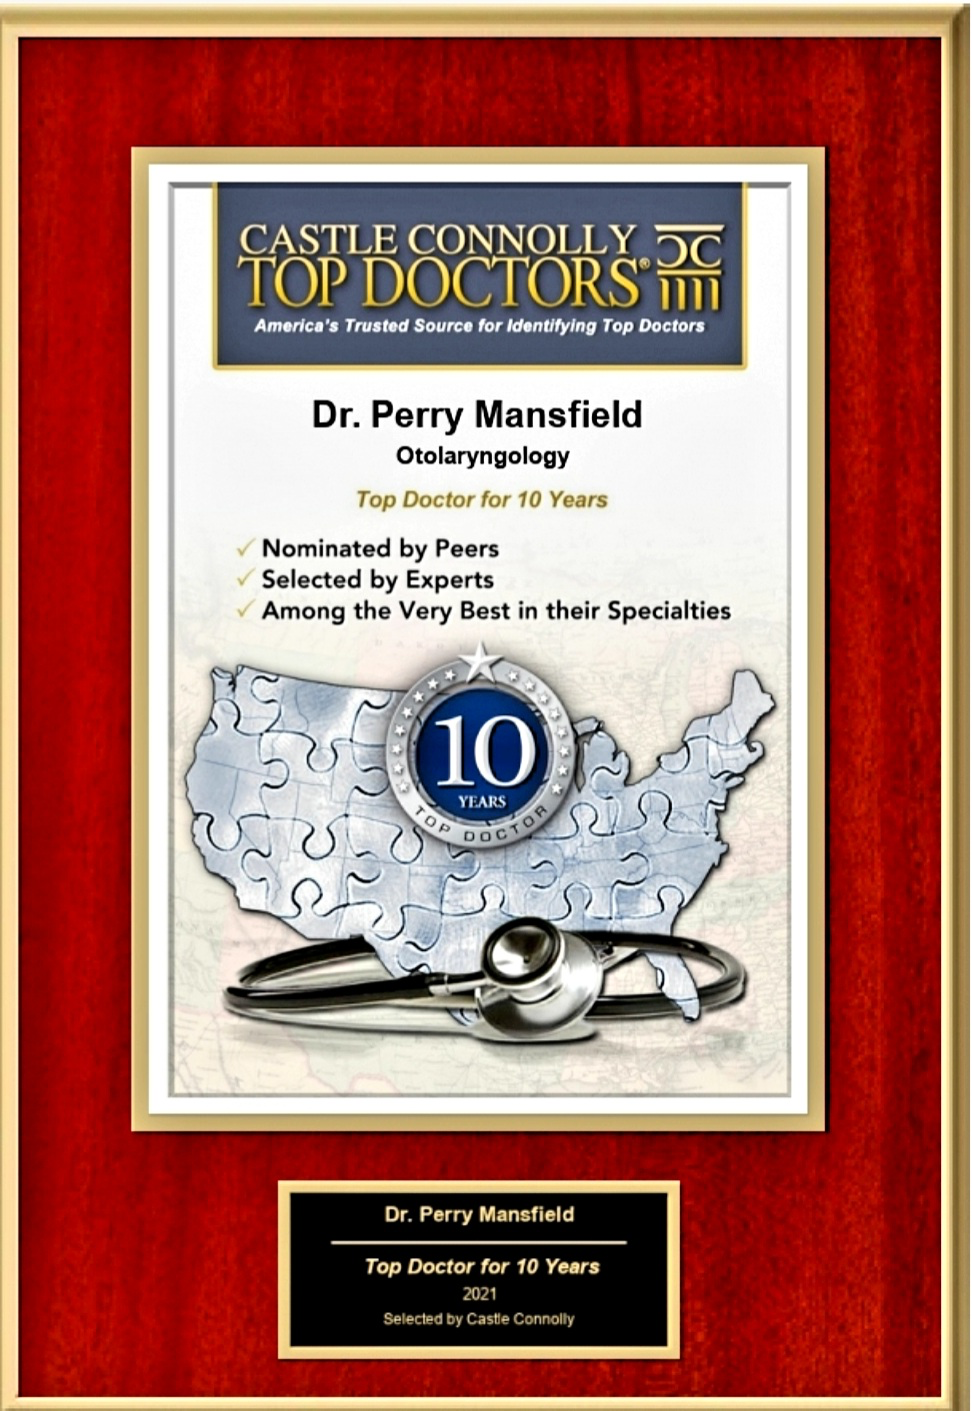 Dr. Perry Mansfield